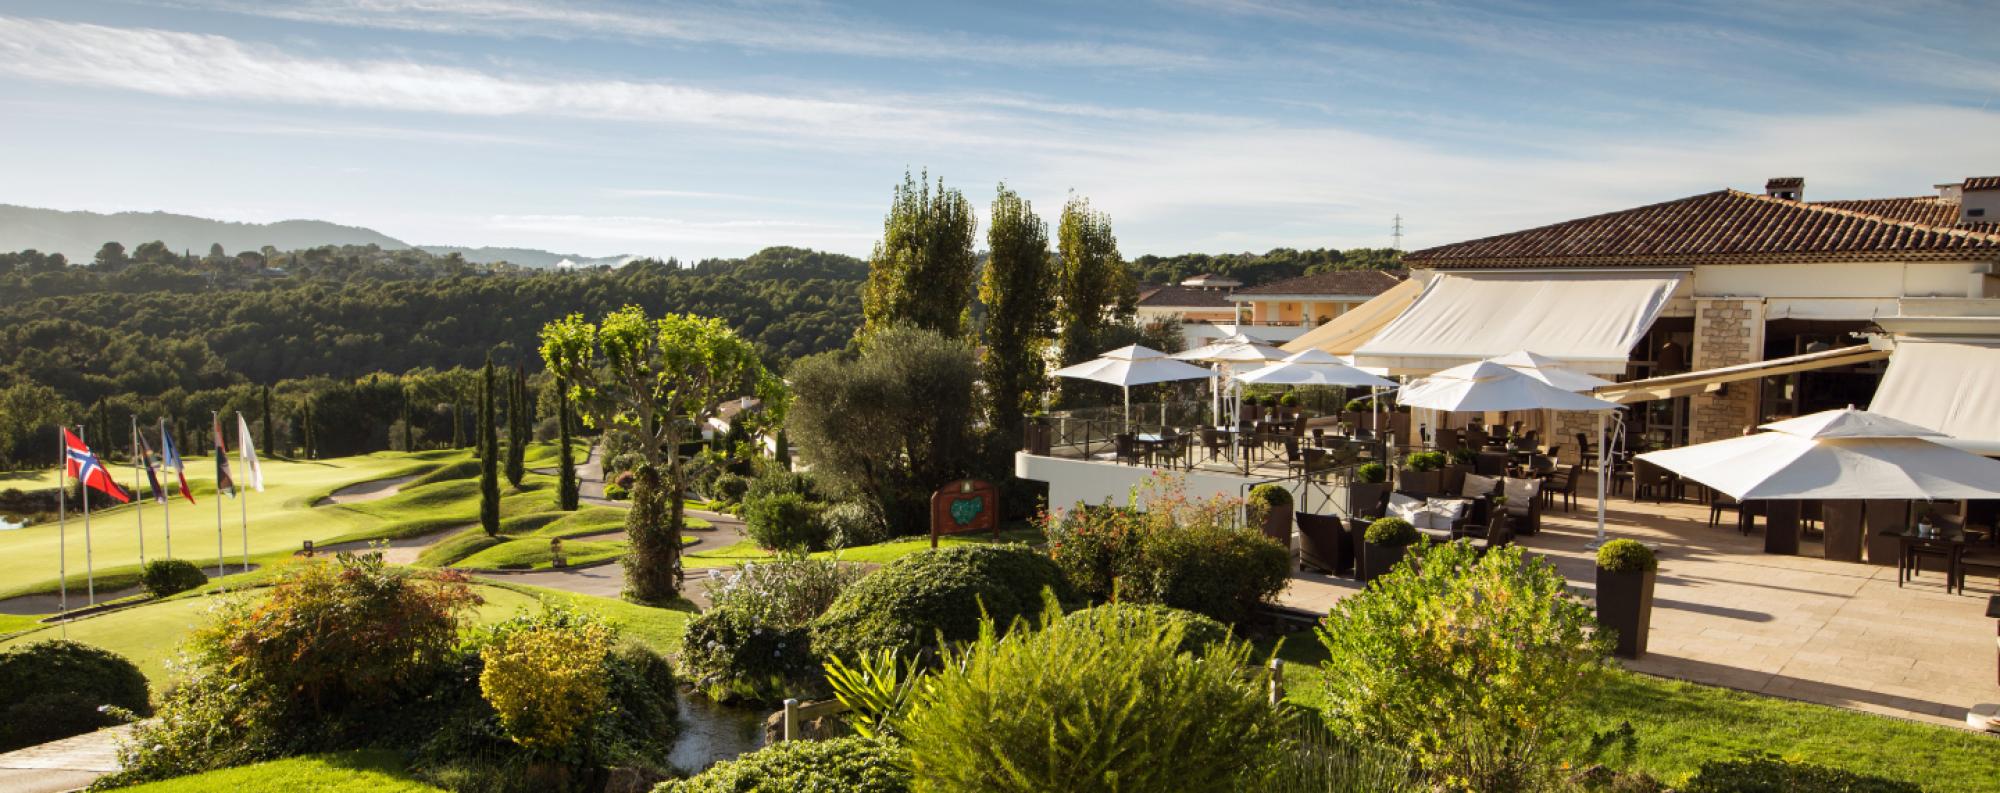 Royal Mougins Golf Club has got lots of the most popular golf course near South of France